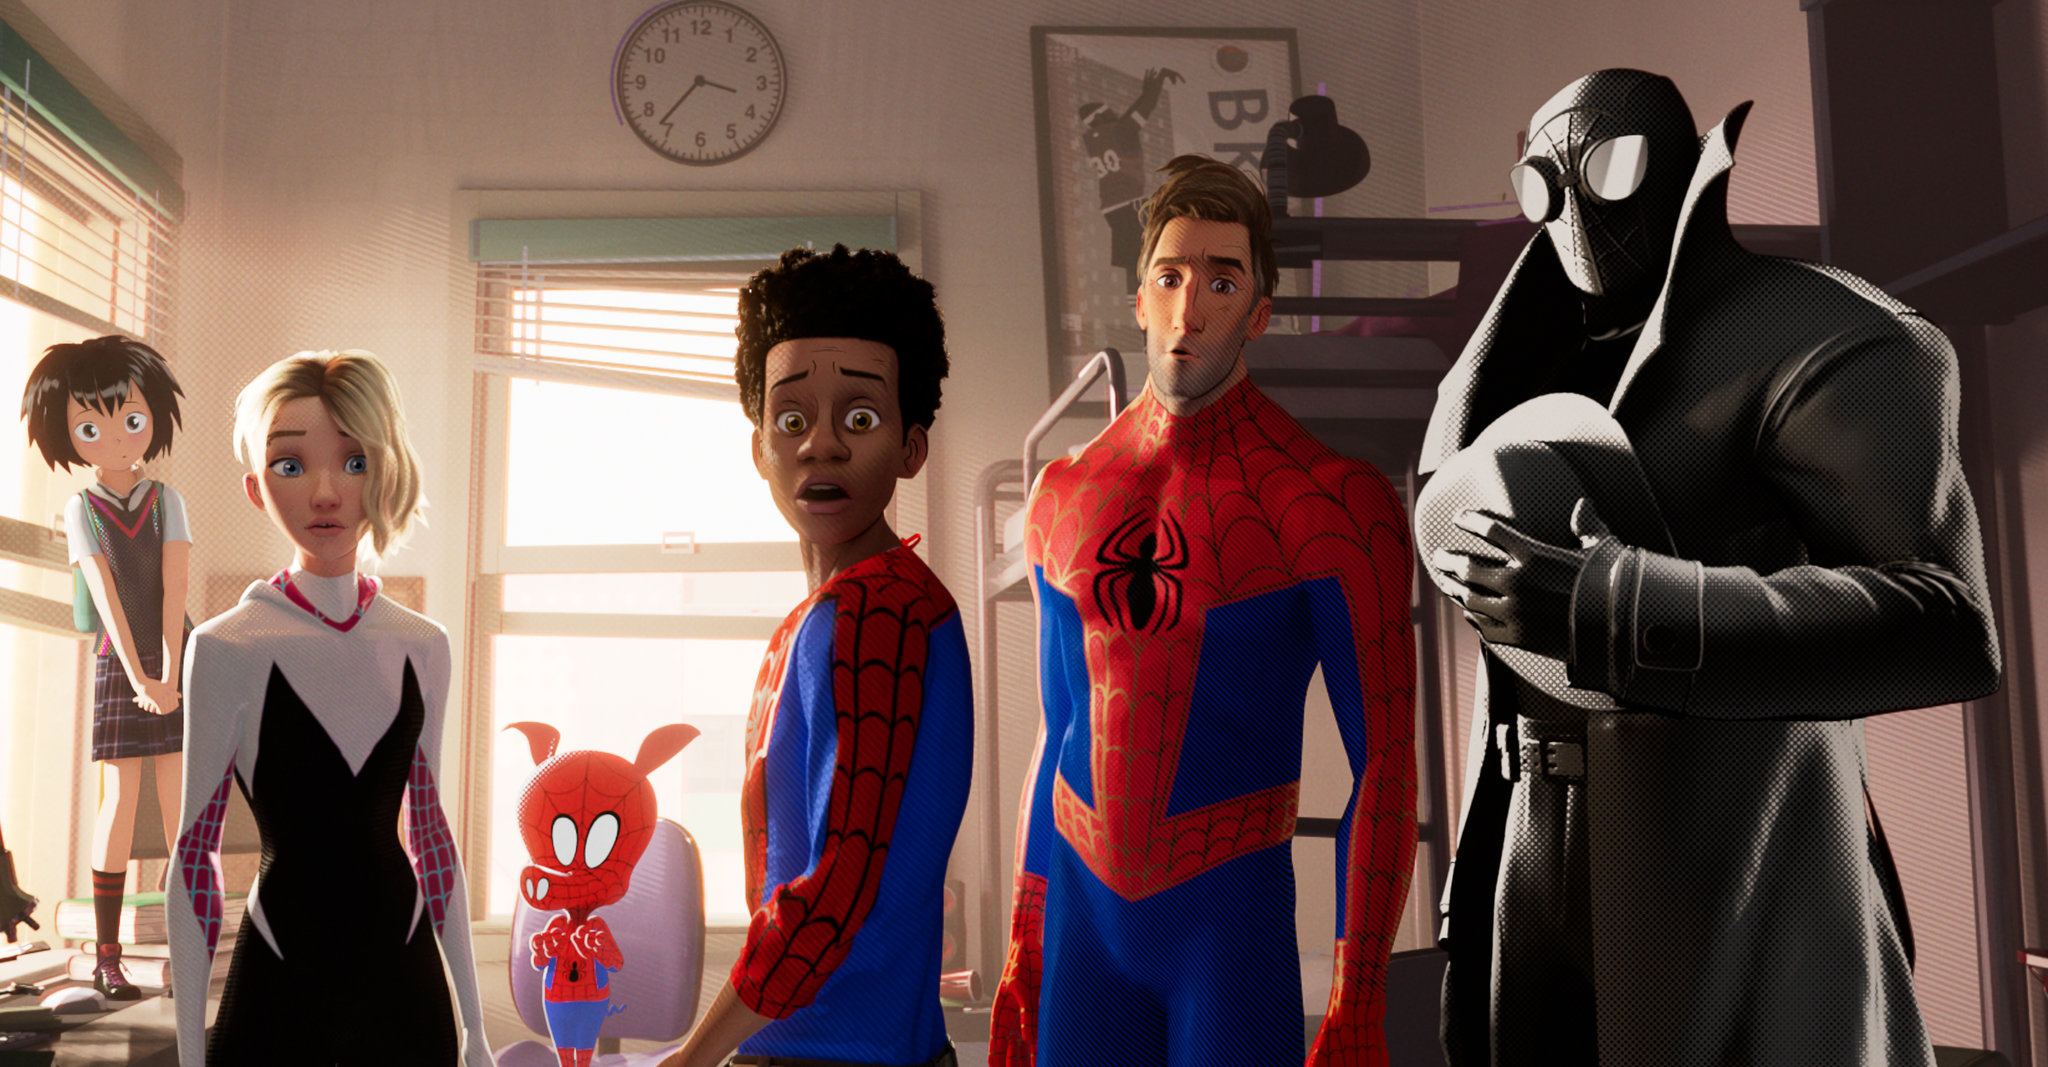 The gang of Spider-Man: Into the Spider-Verse